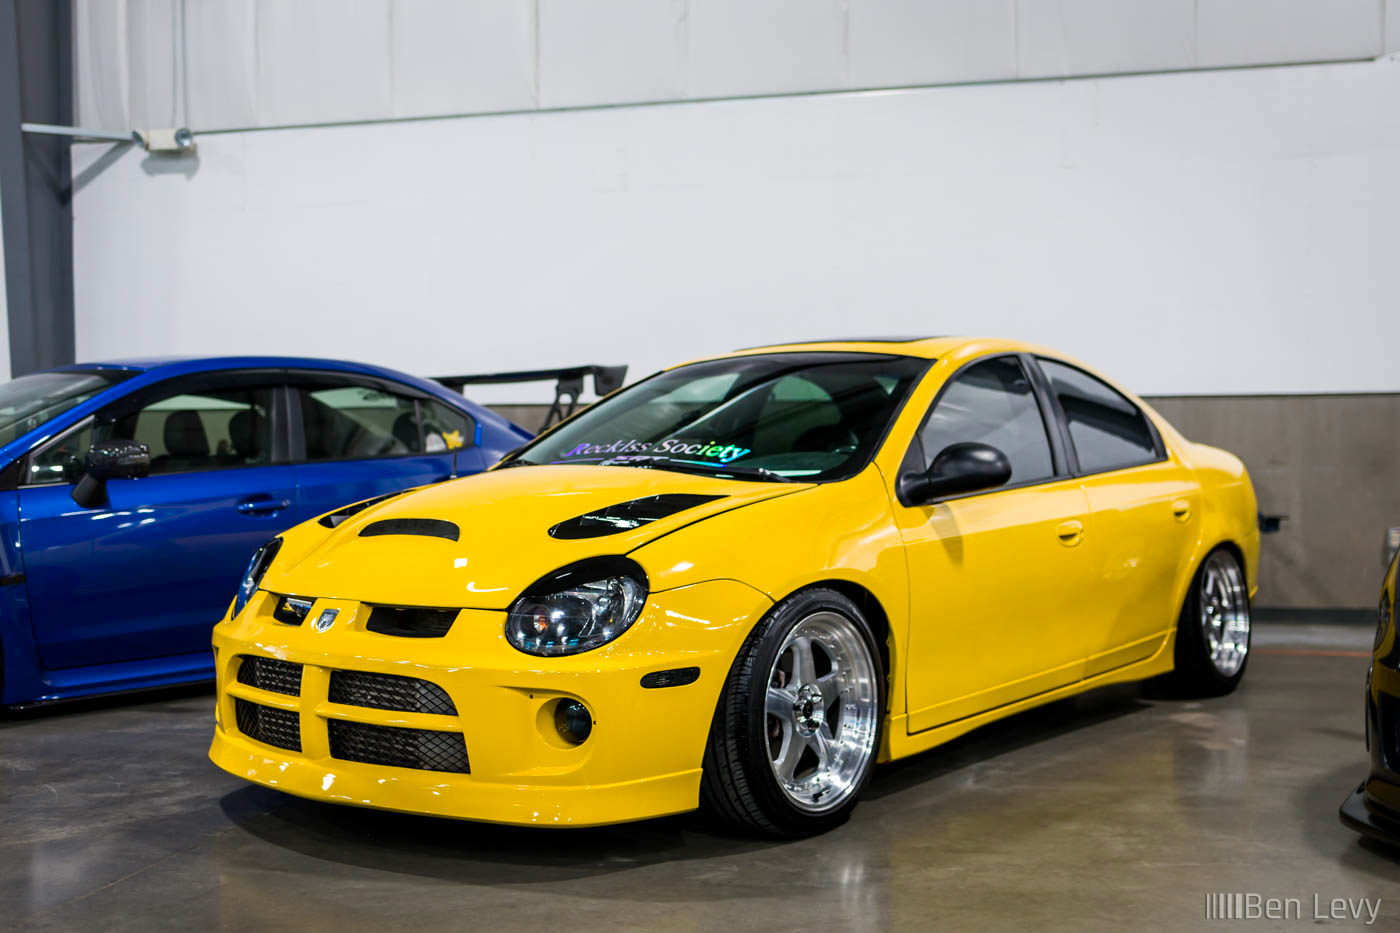 Yellow Dodge Neon SRT-4 at Cars and Culture Show